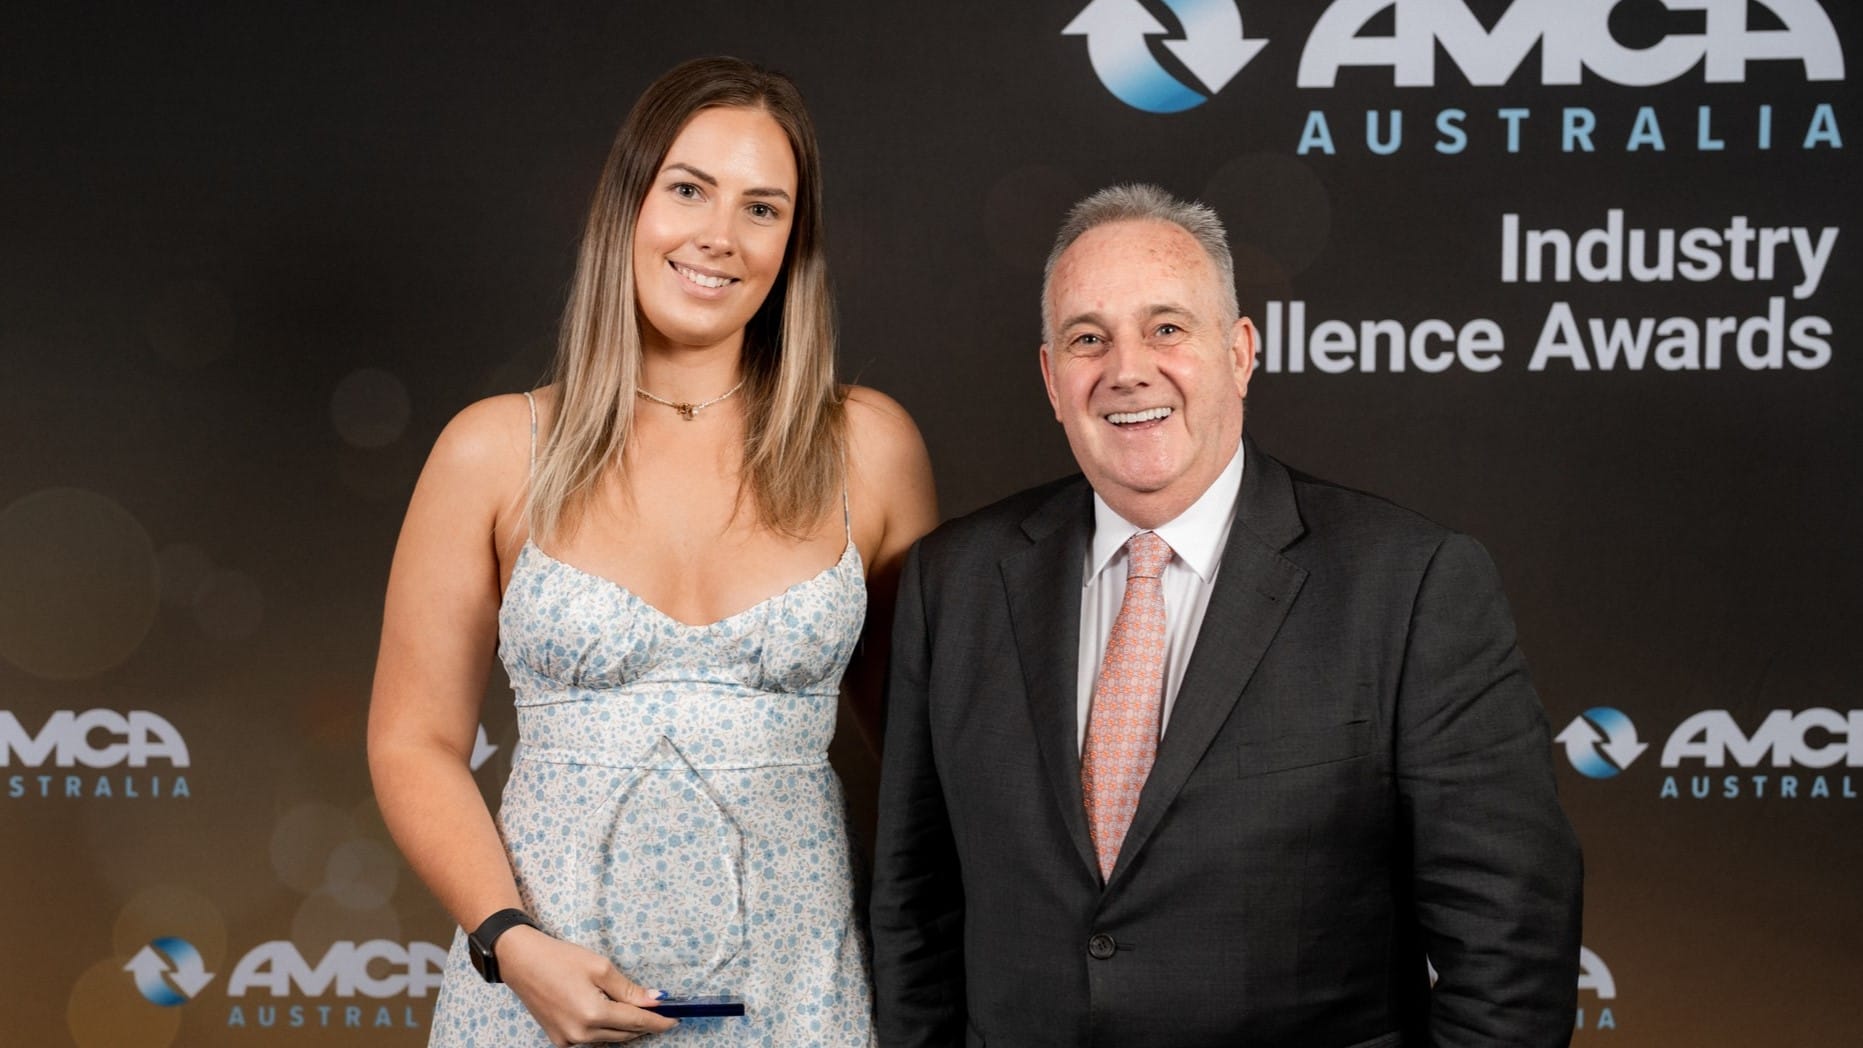 Winning A.G. Coombs’ Talent at the AMCA National Industry Excellence